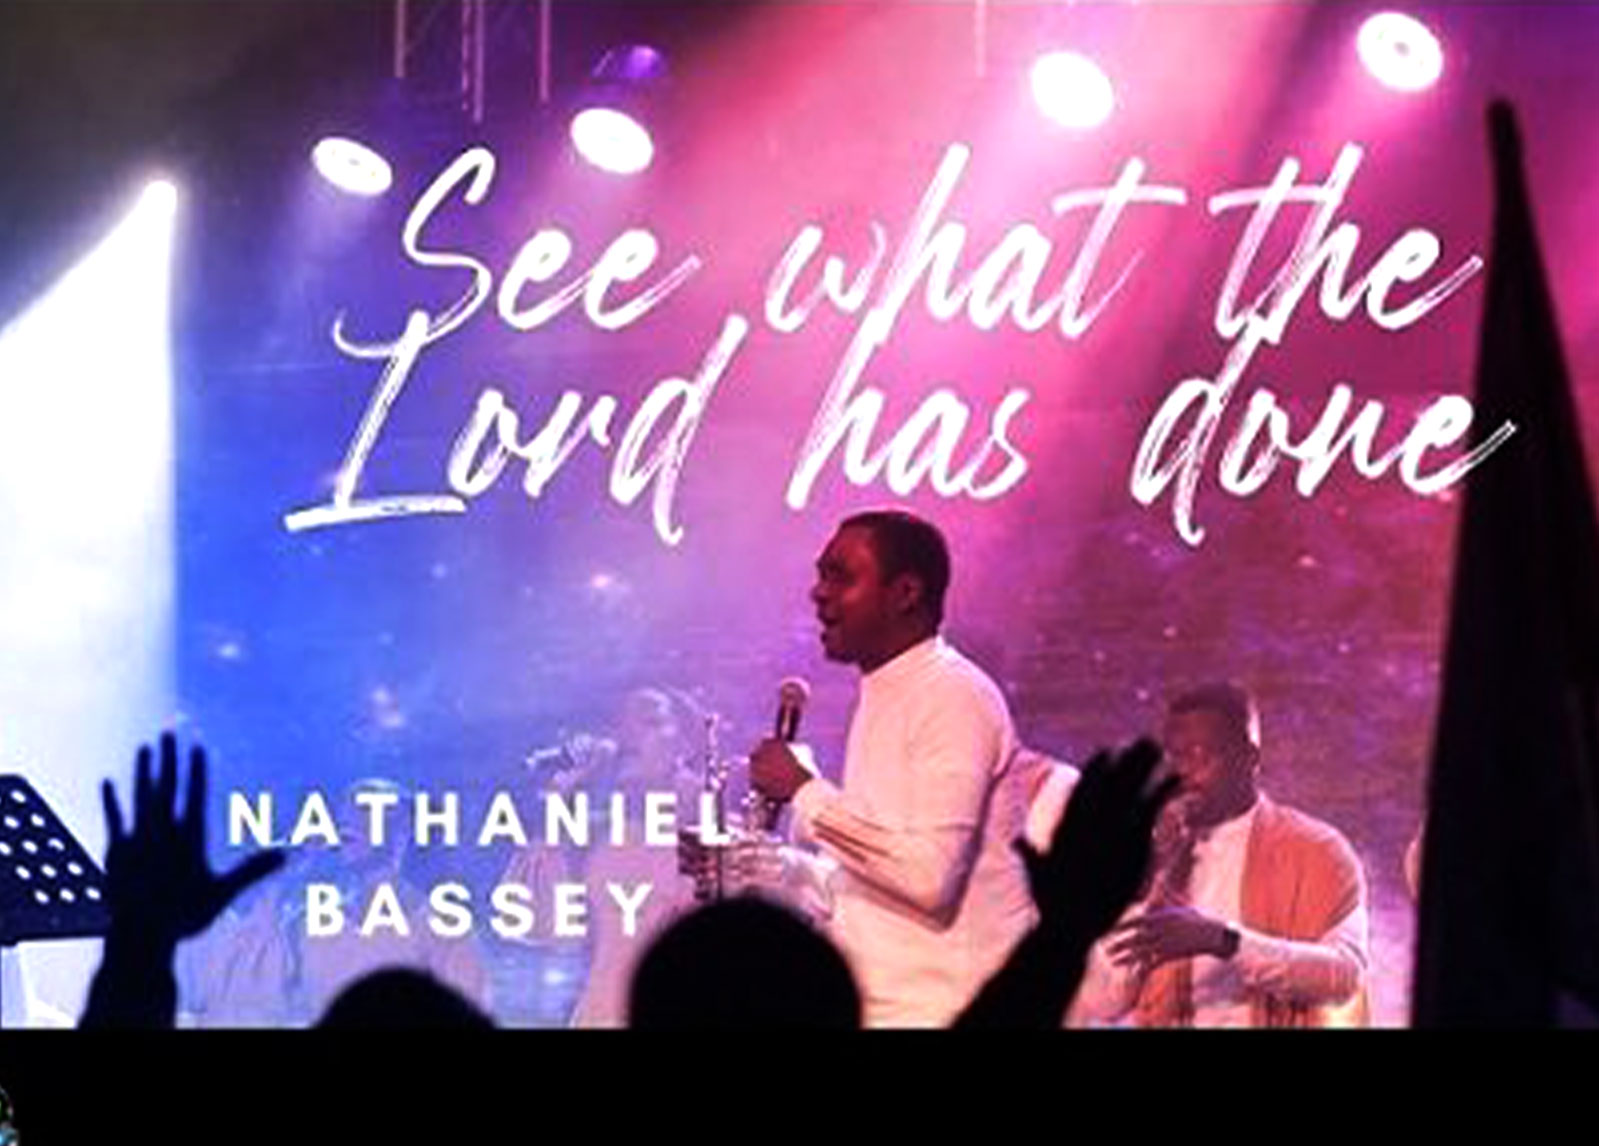 MUSIC VIDEO: SEE WHAT THE LORD HAS DONE - NATHANIEL BASSEY